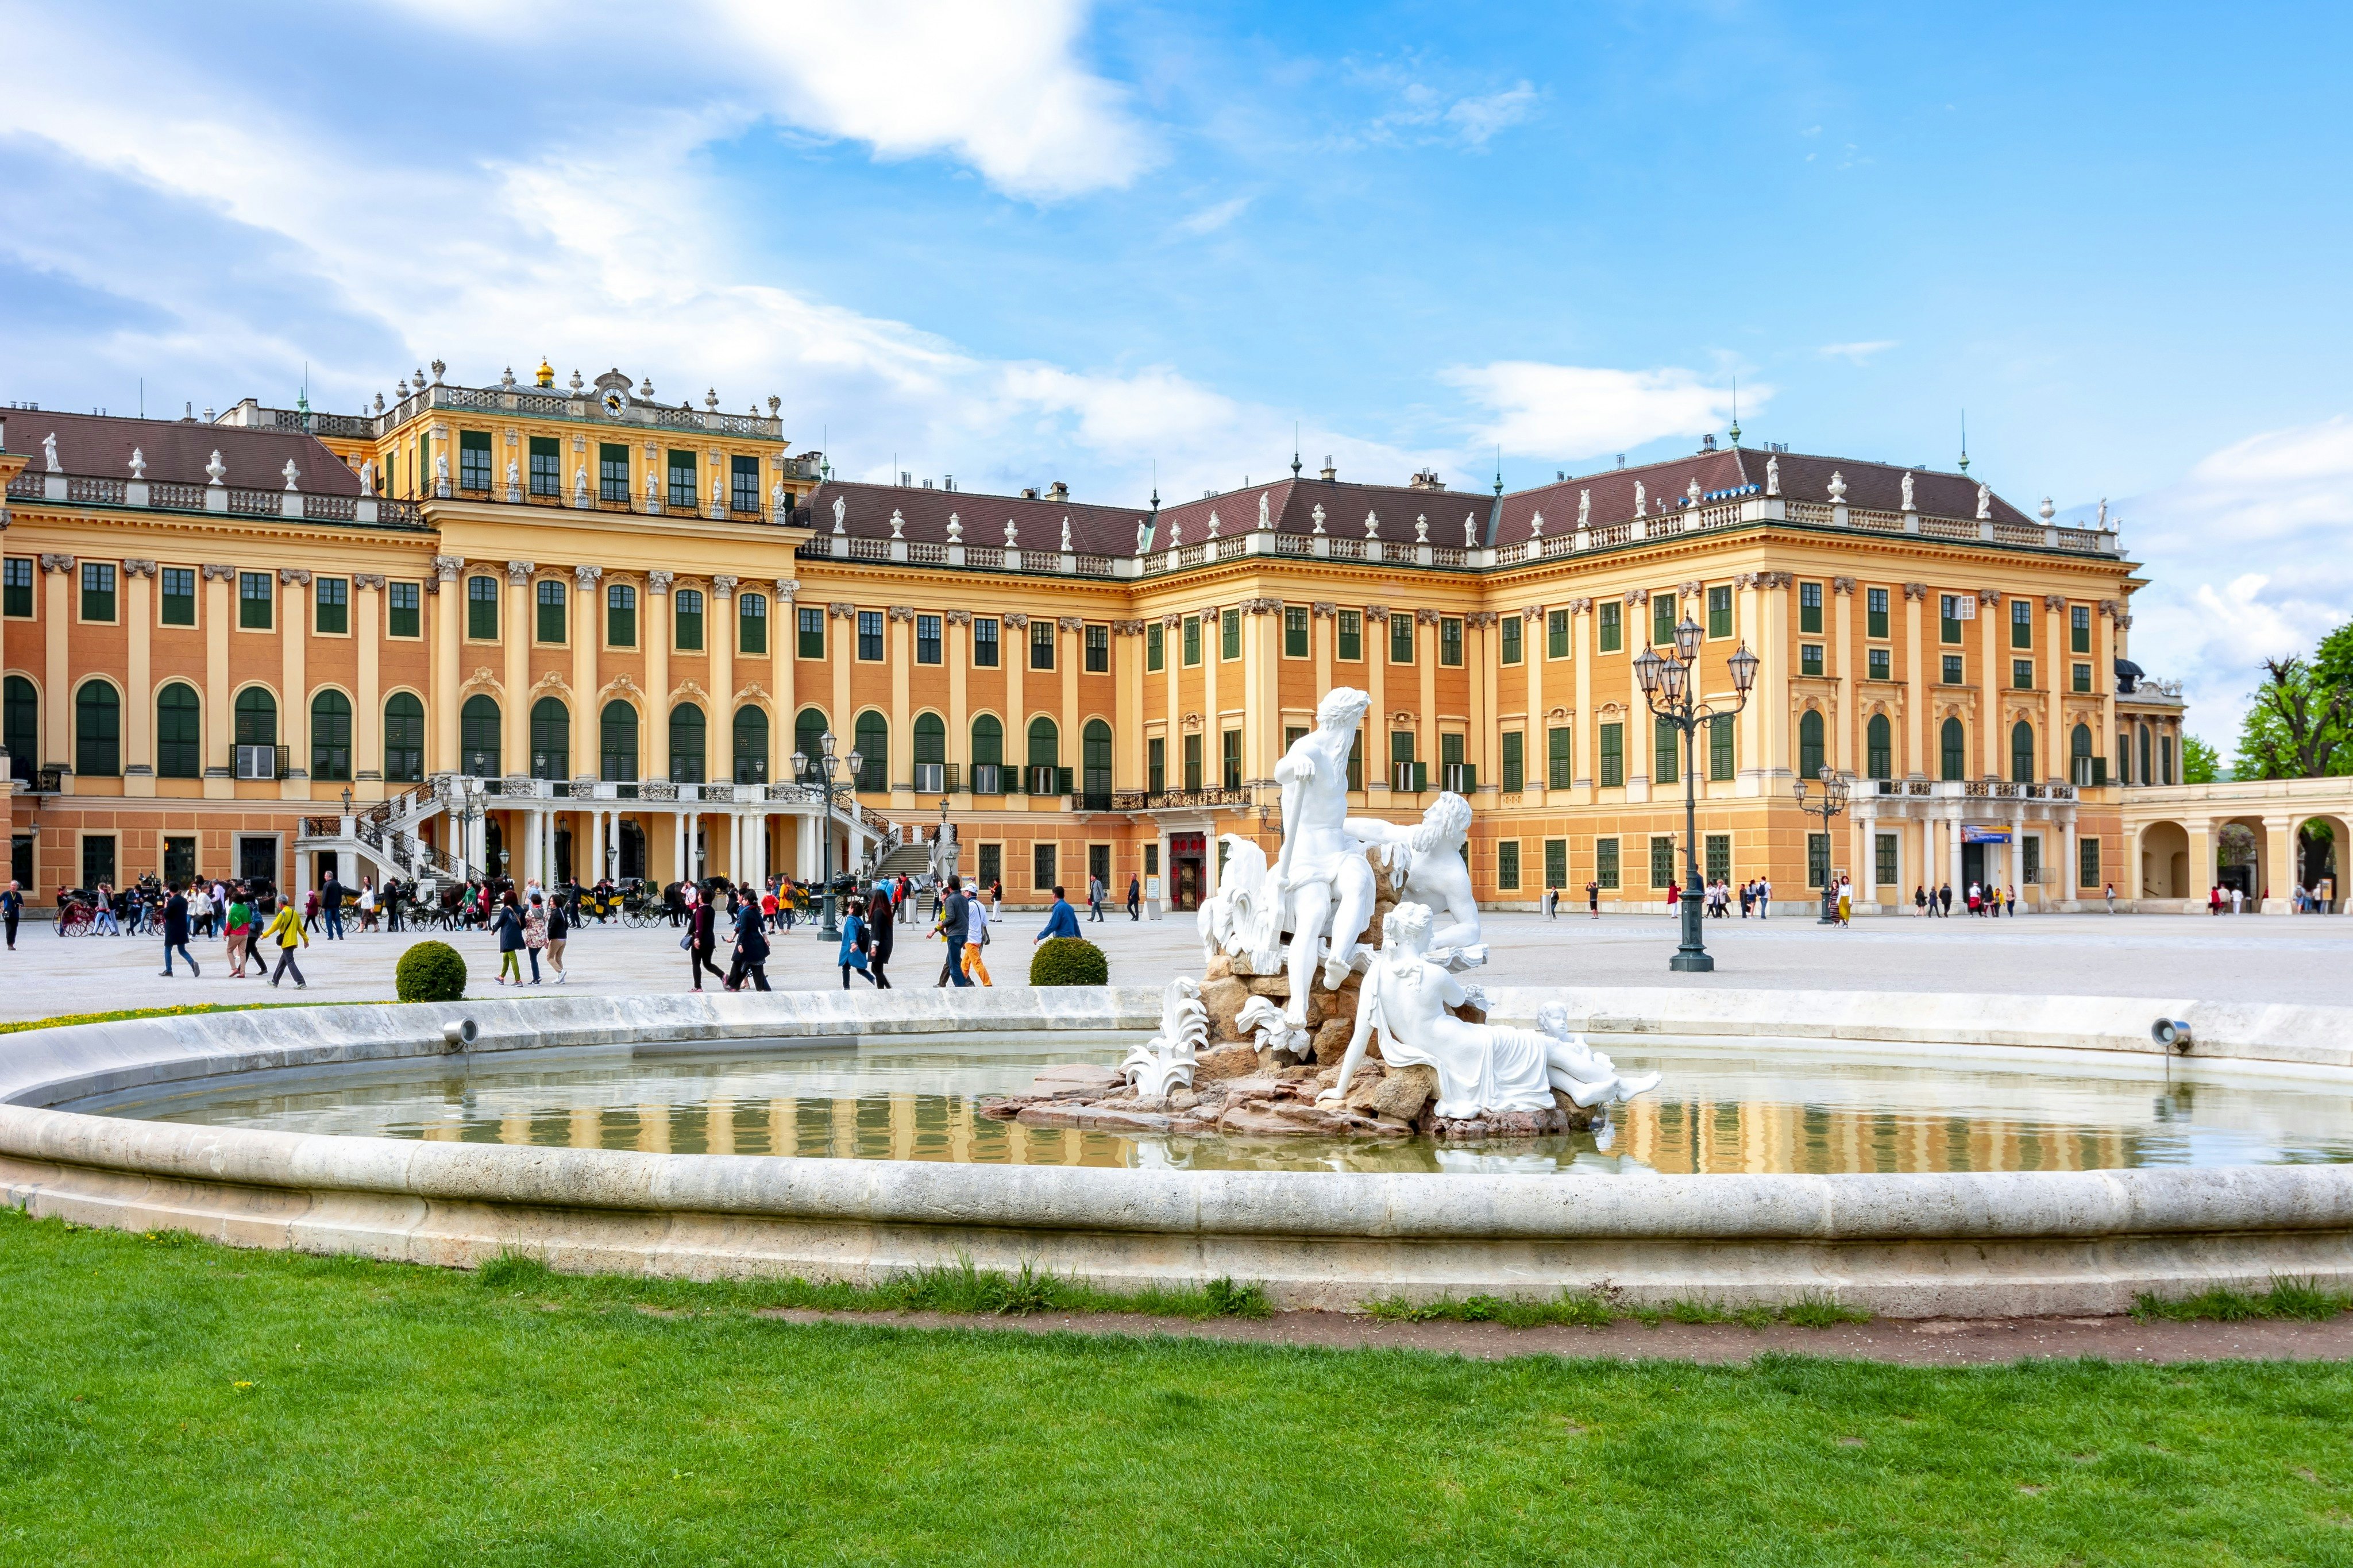 History Guide to Schönbrunn Palace Gardens, Zoo & Monuments, Vienna